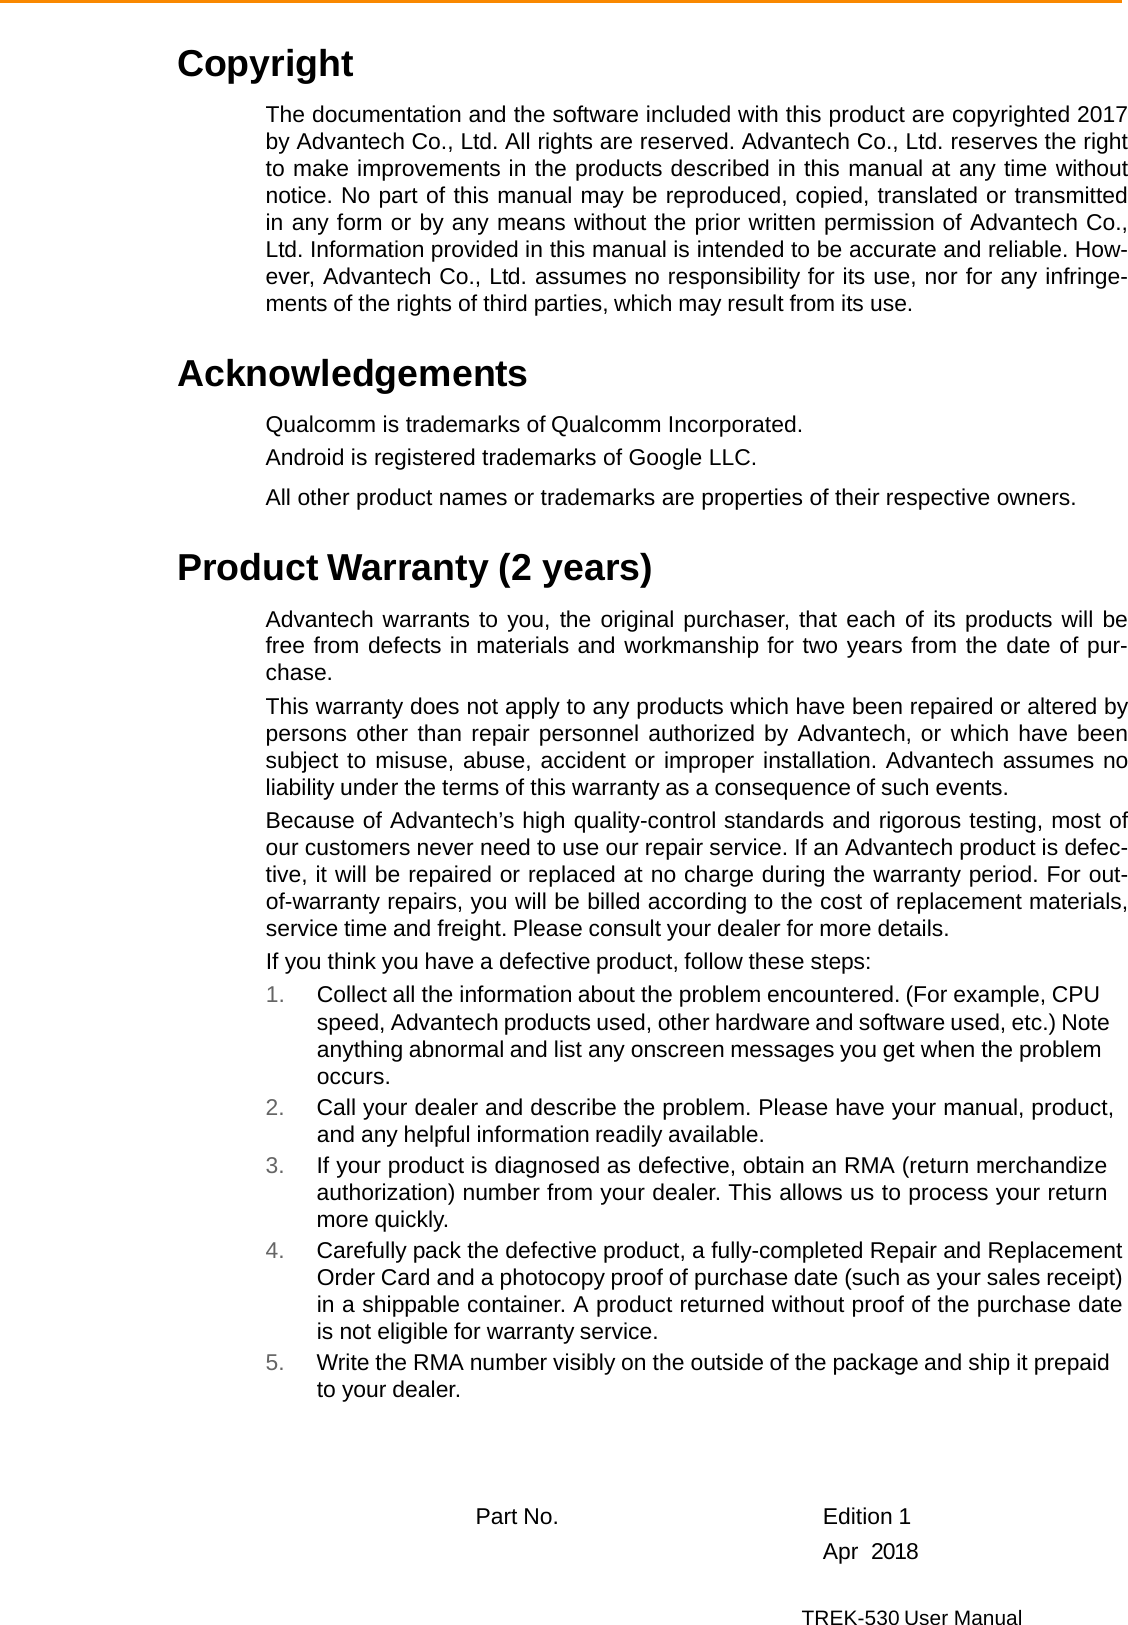 TREK-530 User Manual  Copyright  The documentation and the software included with this product are copyrighted 2017 by Advantech Co., Ltd. All rights are reserved. Advantech Co., Ltd. reserves the right to make improvements in the products described in this manual at any time without notice. No part of this manual may be reproduced, copied, translated or transmitted in any form or by any means without the prior written permission of Advantech Co., Ltd. Information provided in this manual is intended to be accurate and reliable. How- ever, Advantech Co., Ltd. assumes no responsibility for its use, nor for any infringe- ments of the rights of third parties, which may result from its use.   Acknowledgements  Qualcomm is trademarks of Qualcomm Incorporated. Android is registered trademarks of Google LLC. All other product names or trademarks are properties of their respective owners.  Product Warranty (2 years)  Advantech warrants to you, the original purchaser, that each of its products will be free from defects in materials and workmanship for two years from the date of pur- chase. This warranty does not apply to any products which have been repaired or altered by persons other than repair personnel authorized by Advantech, or which have been subject to misuse, abuse, accident or improper installation. Advantech assumes no liability under the terms of this warranty as a consequence of such events. Because of Advantech’s high quality-control standards and rigorous testing, most of our customers never need to use our repair service. If an Advantech product is defec- tive, it will be repaired or replaced at no charge during the warranty period. For out- of-warranty repairs, you will be billed according to the cost of replacement materials, service time and freight. Please consult your dealer for more details. If you think you have a defective product, follow these steps: 1. Collect all the information about the problem encountered. (For example, CPU speed, Advantech products used, other hardware and software used, etc.) Note anything abnormal and list any onscreen messages you get when the problem occurs. 2. Call your dealer and describe the problem. Please have your manual, product, and any helpful information readily available. 3. If your product is diagnosed as defective, obtain an RMA (return merchandize authorization) number from your dealer. This allows us to process your return more quickly. 4. Carefully pack the defective product, a fully-completed Repair and Replacement Order Card and a photocopy proof of purchase date (such as your sales receipt) in a shippable container. A product returned without proof of the purchase date is not eligible for warranty service. 5. Write the RMA number visibly on the outside of the package and ship it prepaid to your dealer.      Part No.   Edition 1   Apr  2018 